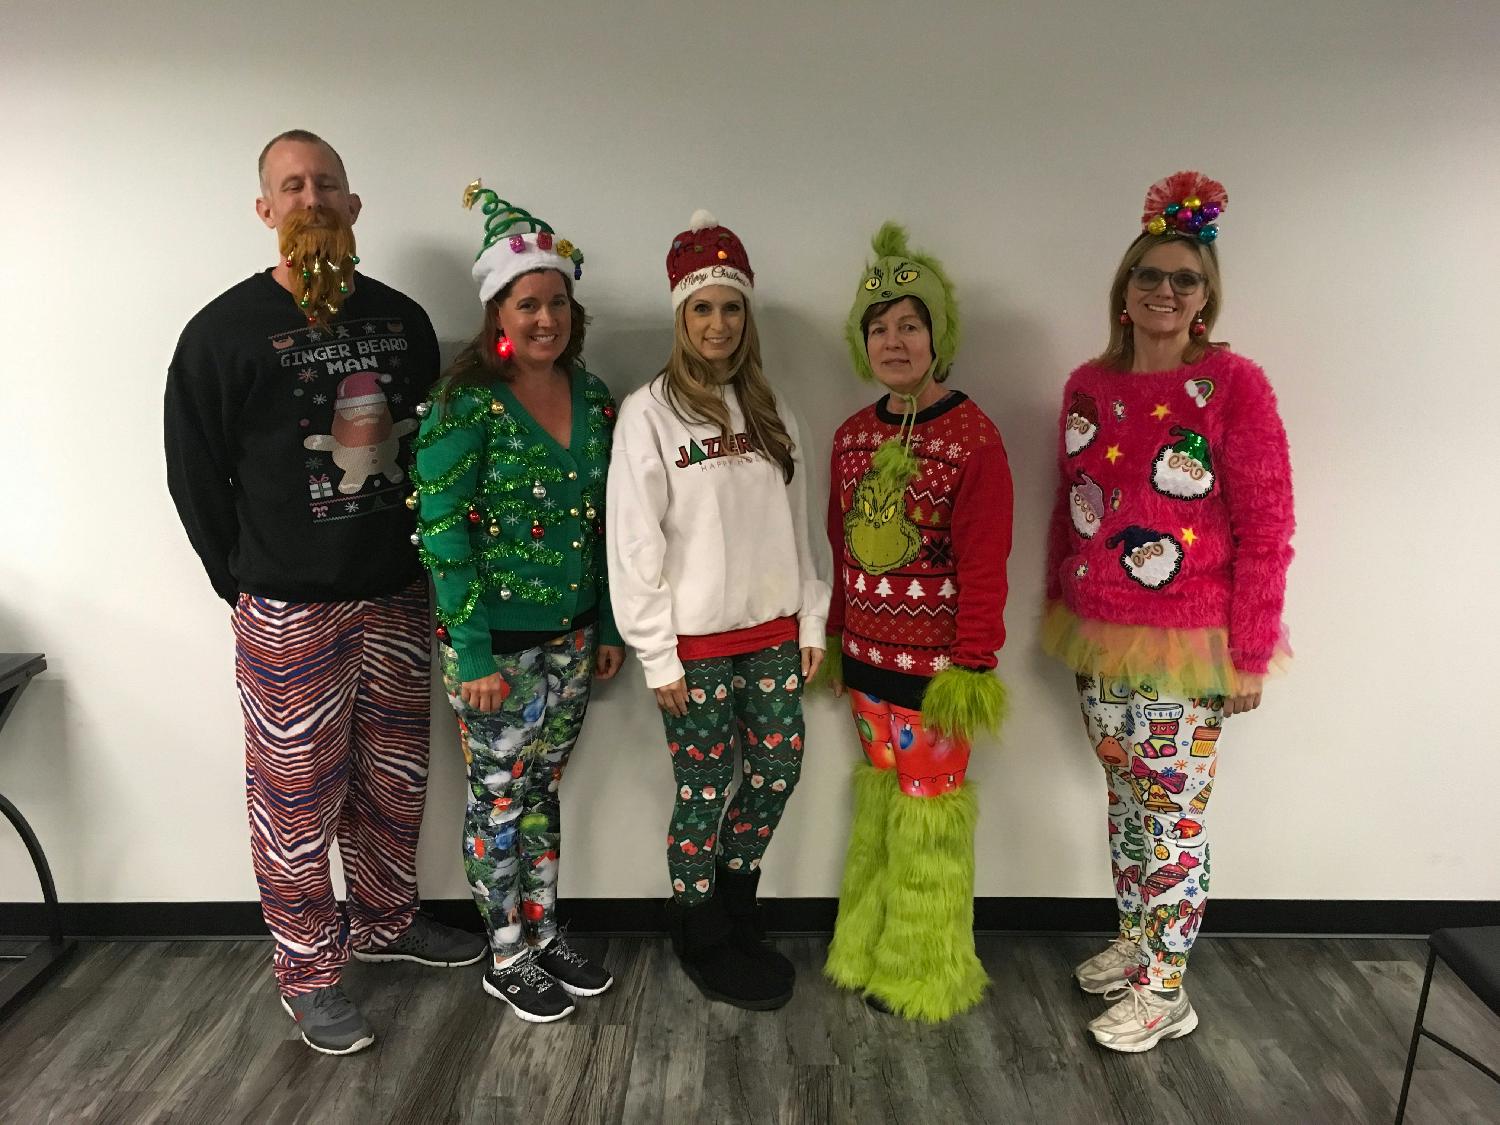 The Management Staff dressed in their holiday best.